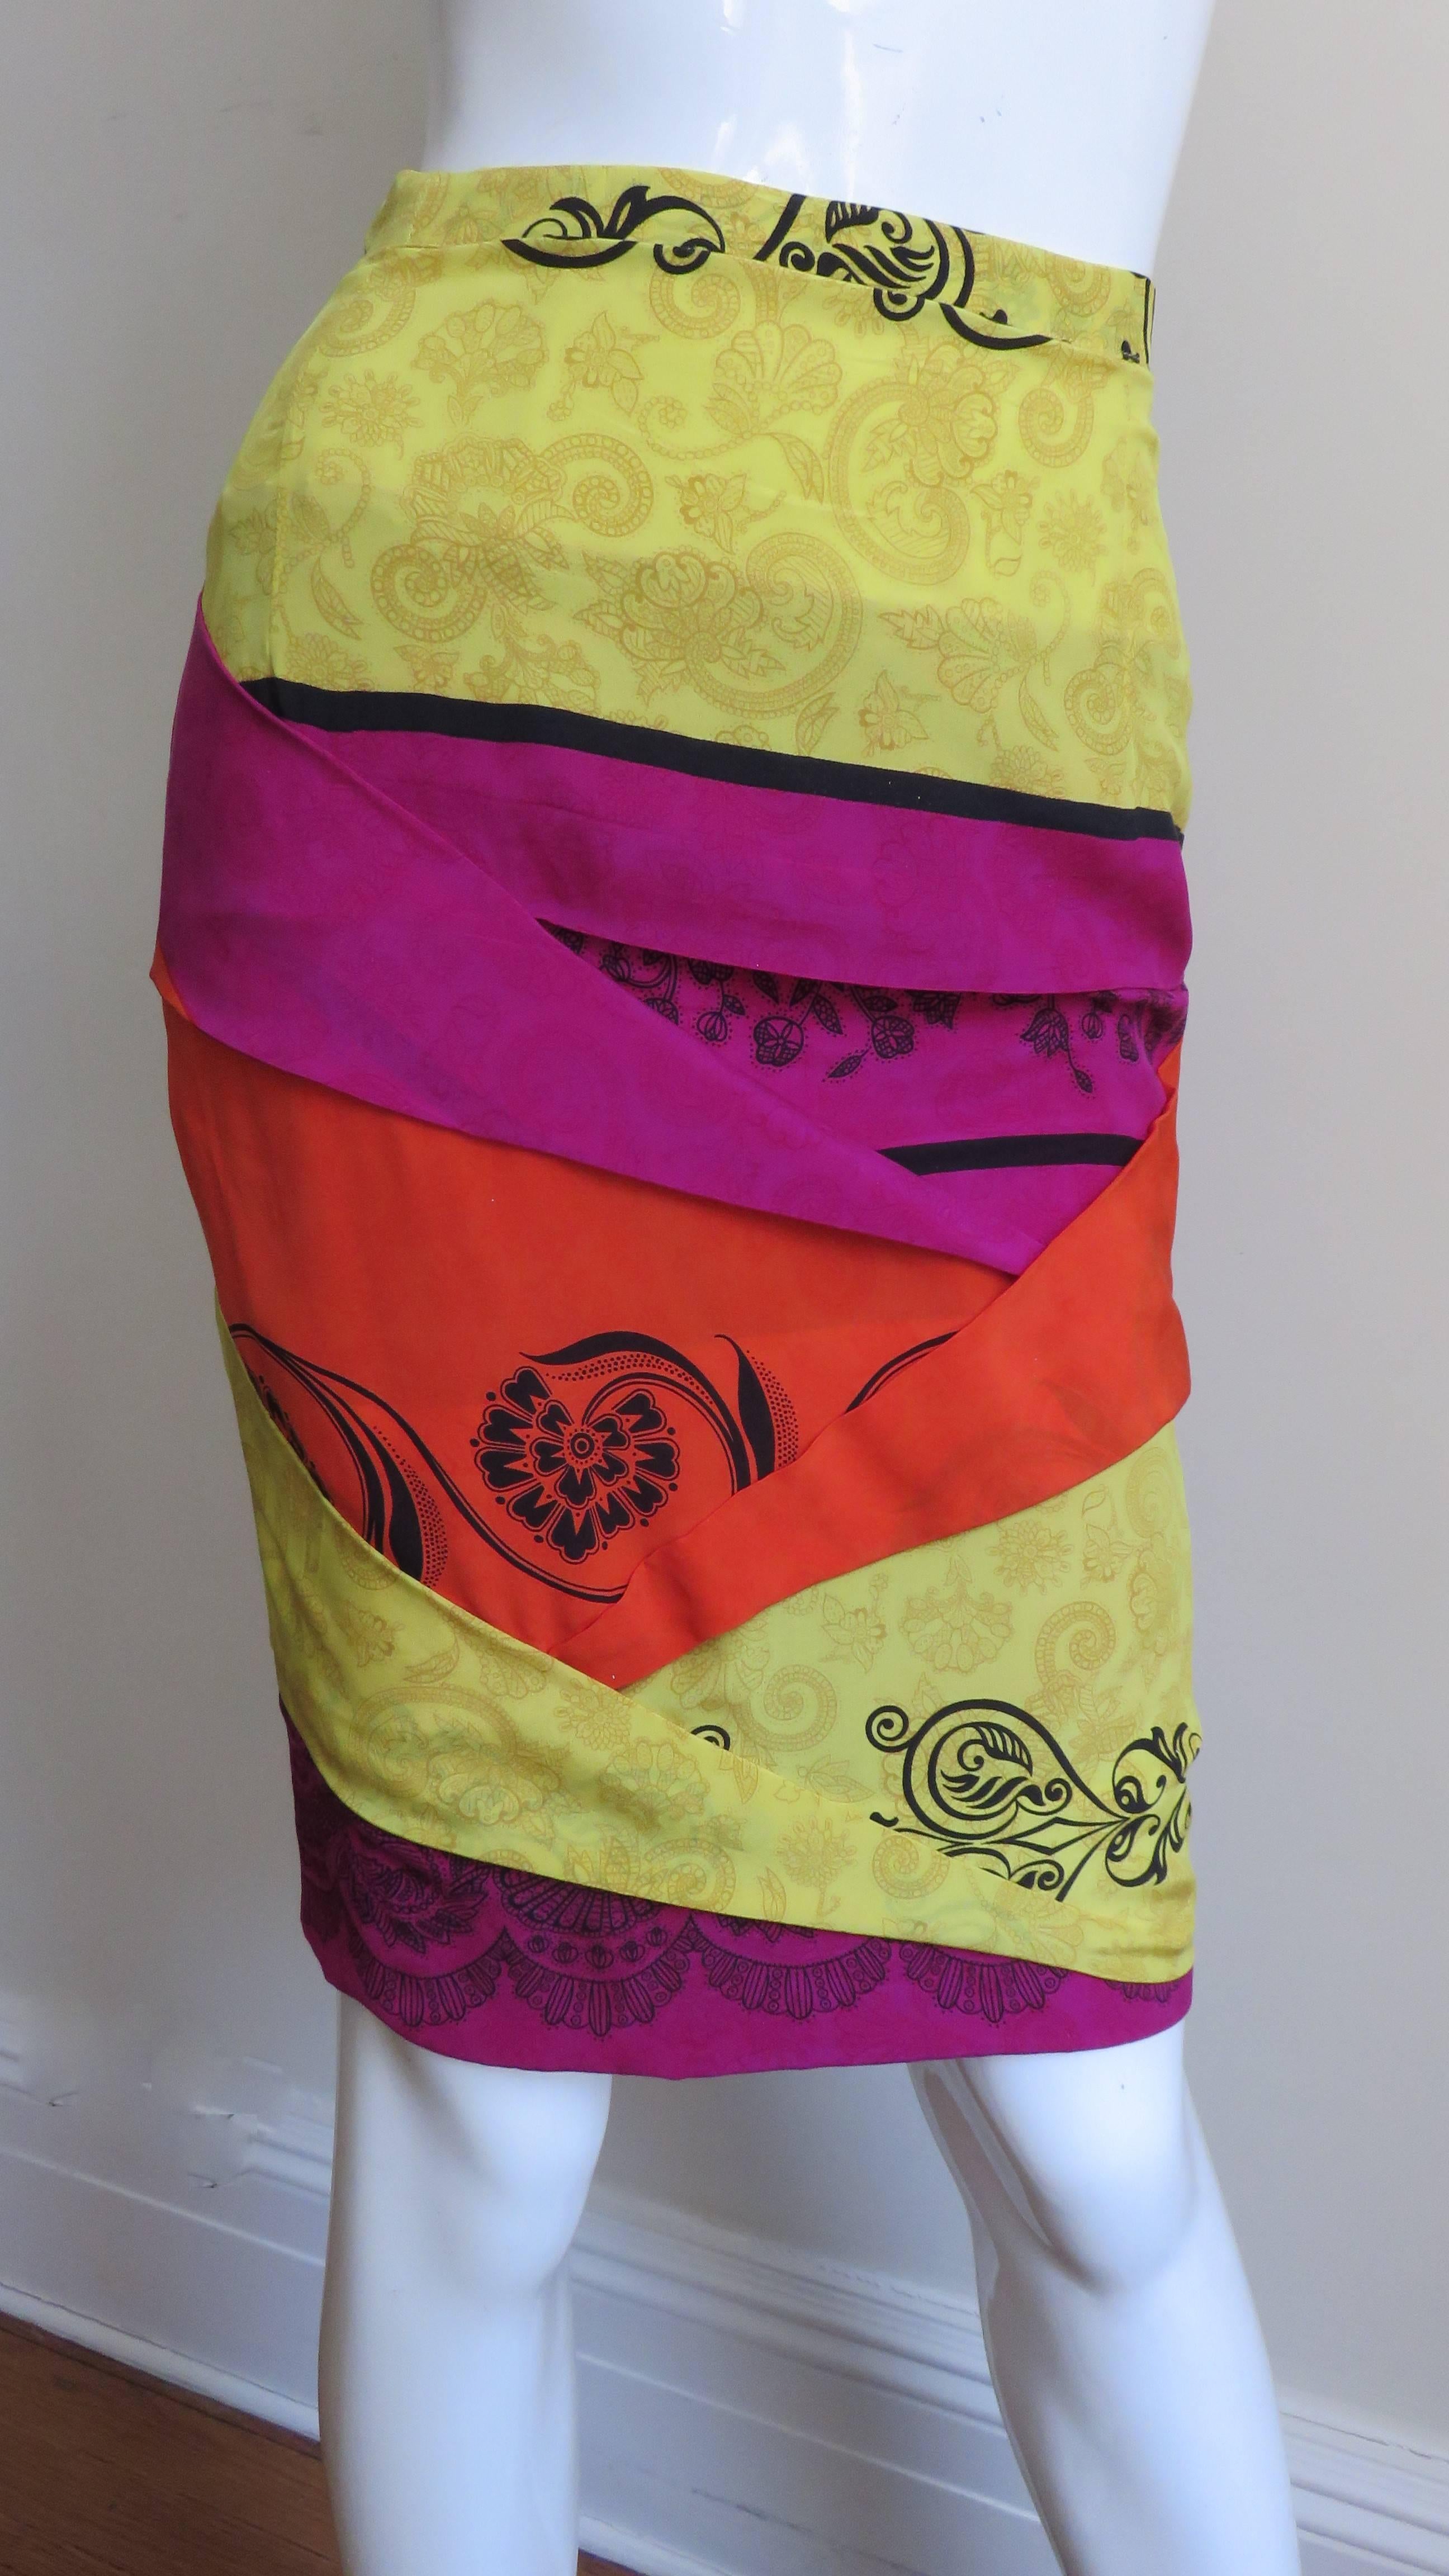 A fabulous silk skirt from Gianni Versace in yellow, orange and magenta silk accented with a black screen print of abstract shapes.  It has angled folds accentuating the fitted shape of the skirt.  The back of the skirt is identical to the front. 